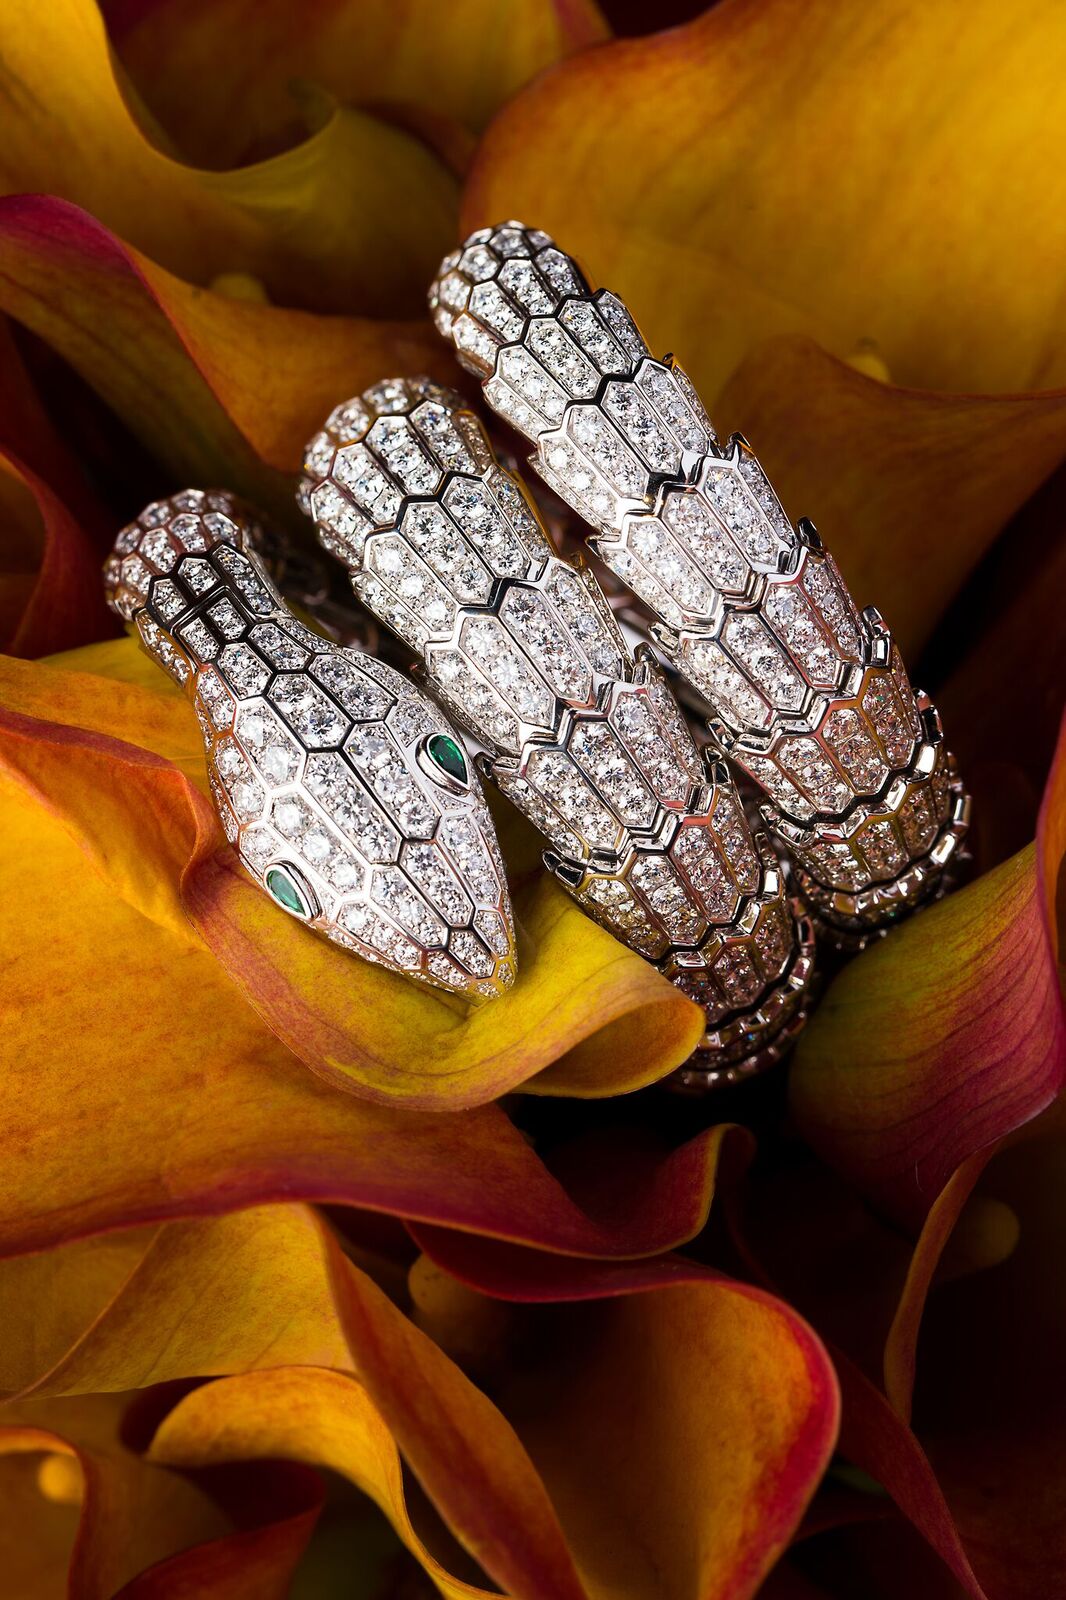 Paris Hosts First Fine Jewelry and Timepiece Awards